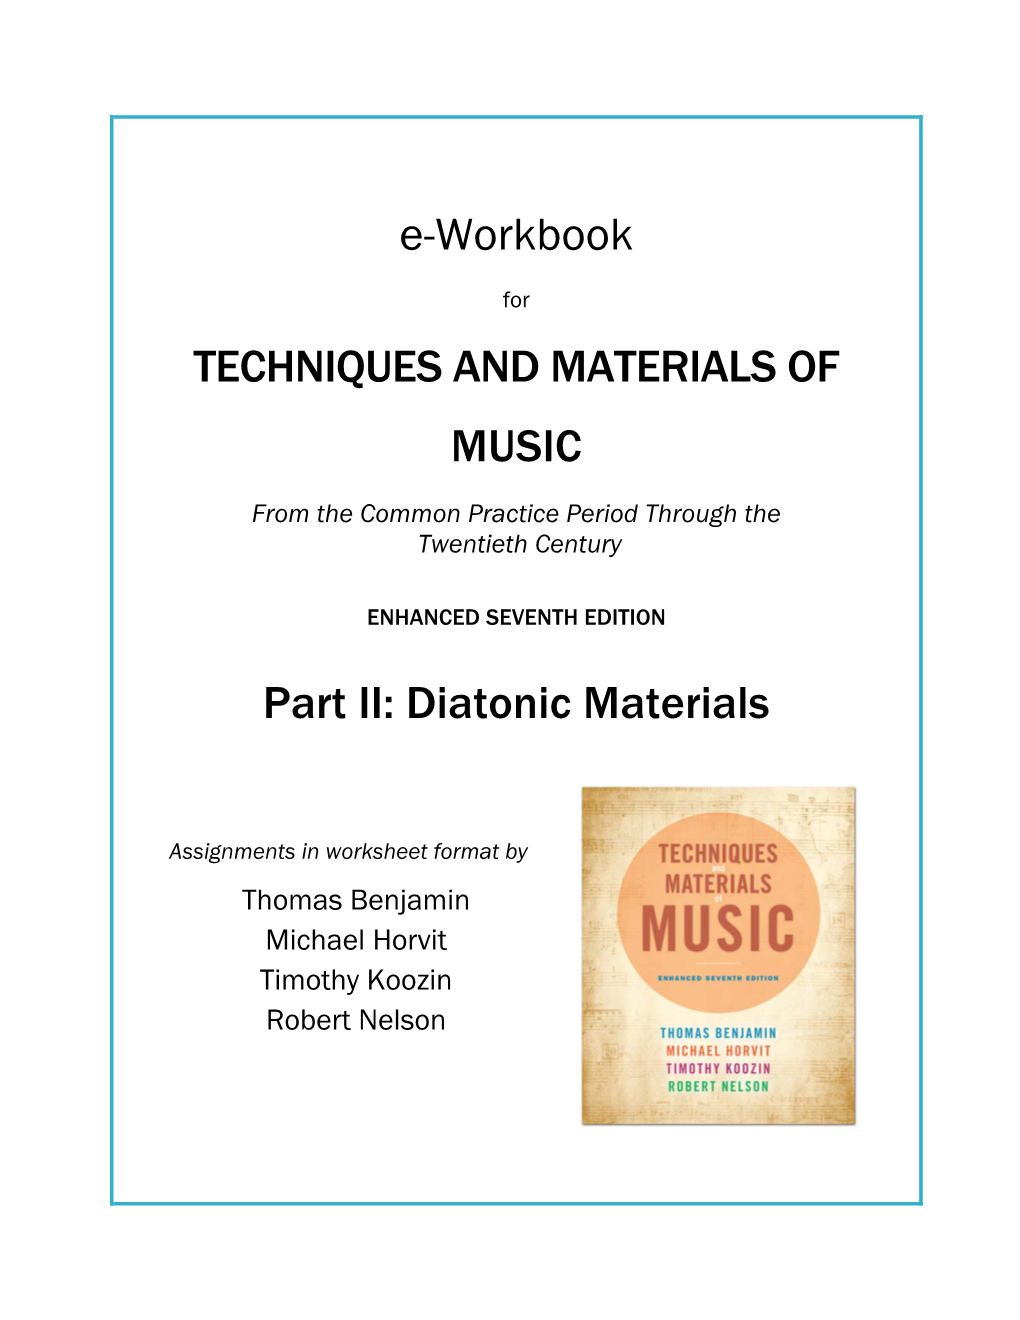 E-Workbook TECHNIQUES and MATERIALS of MUSIC Part II